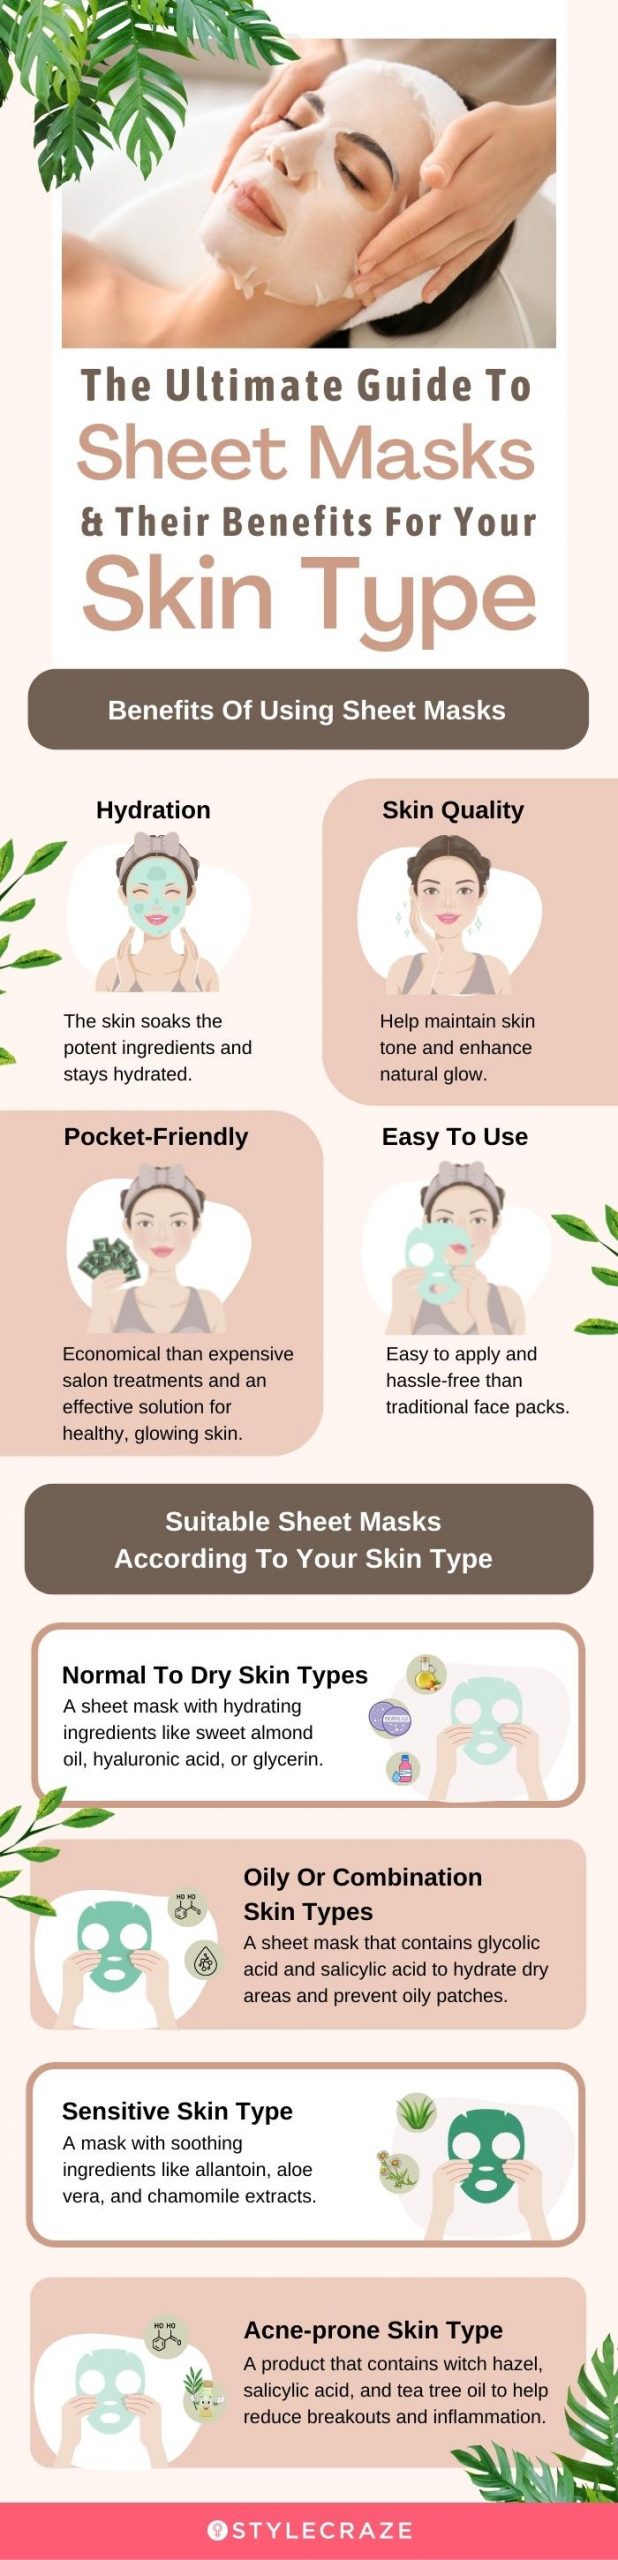 Ultimate Guide To Sheet Masks & Their Benefits For Your Skin Type